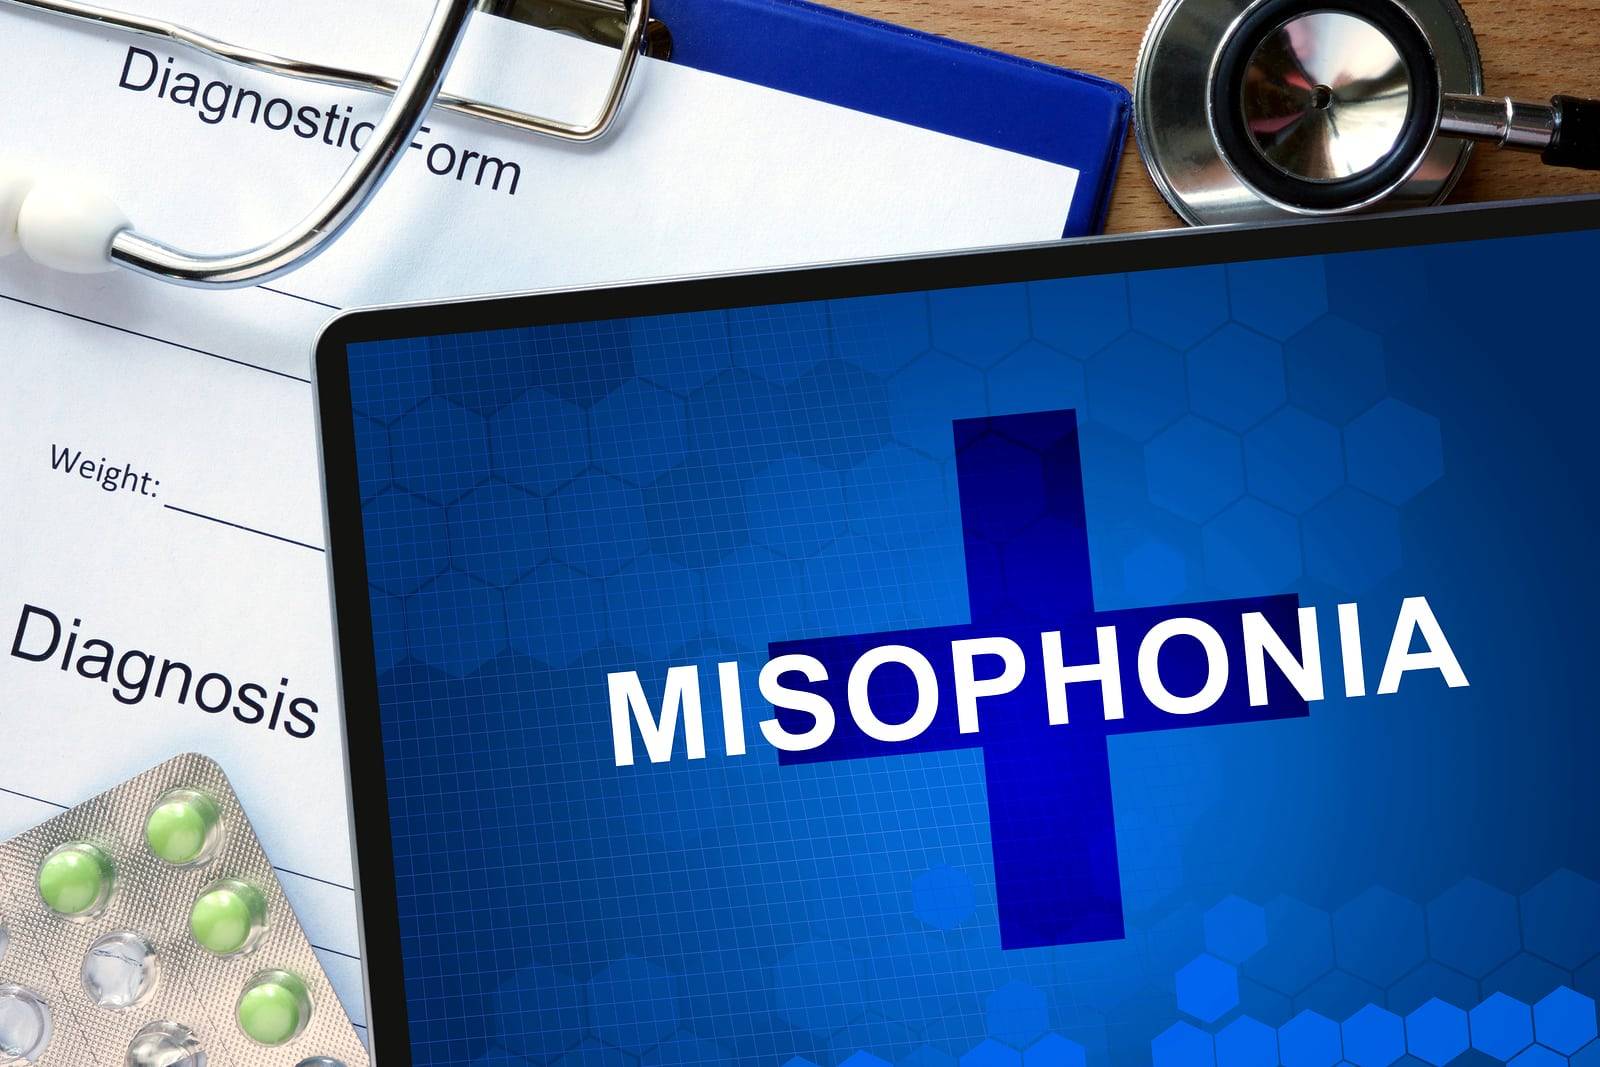 Do I suffer from Misophonia?